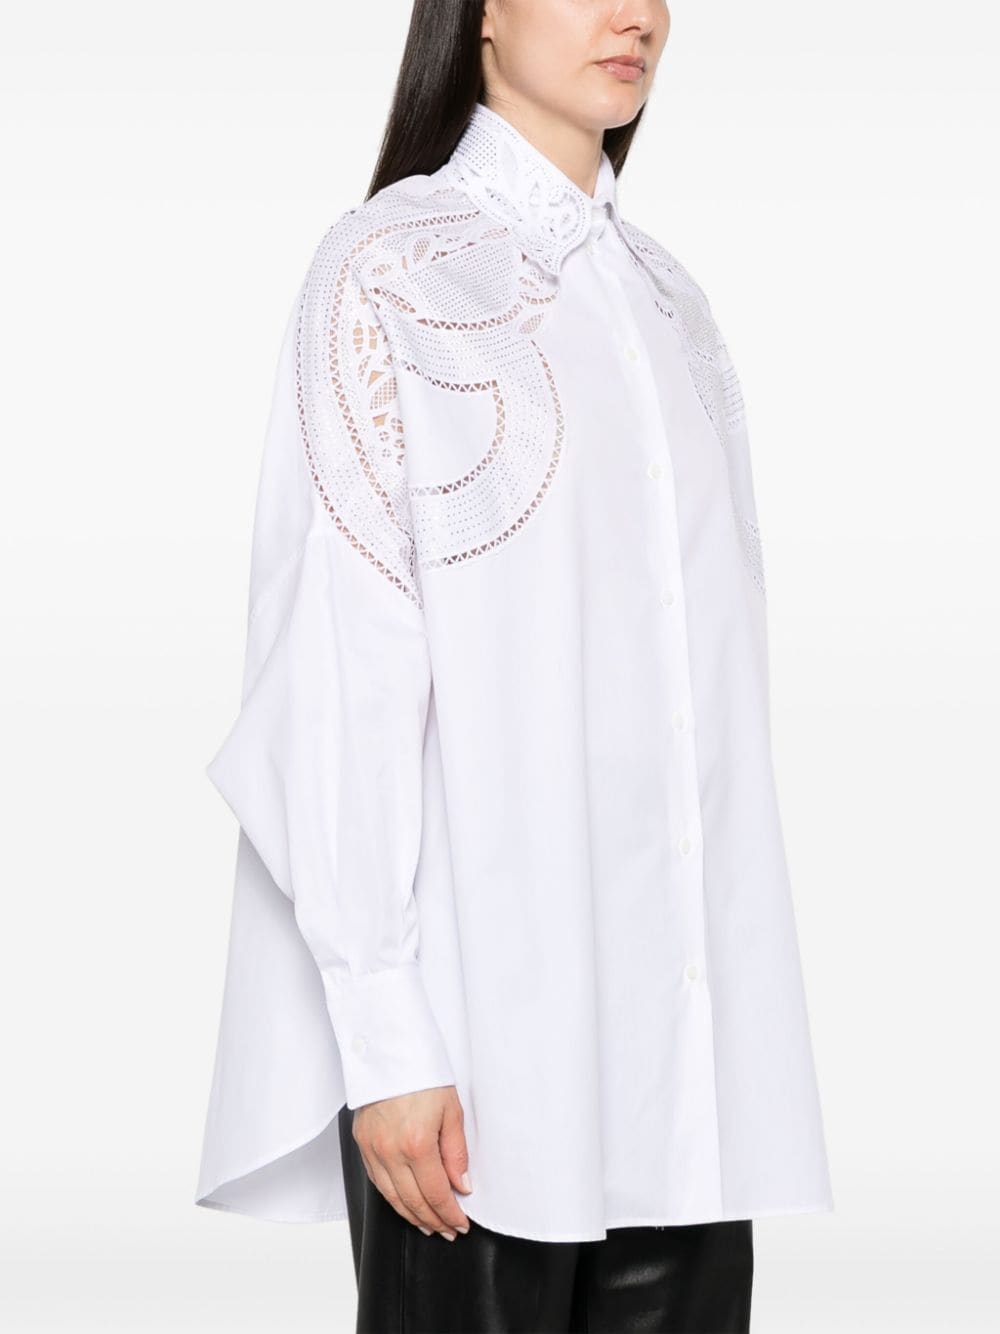 ERMANNO SCERVINO Elegant Oversized White Shirt with Lace Details